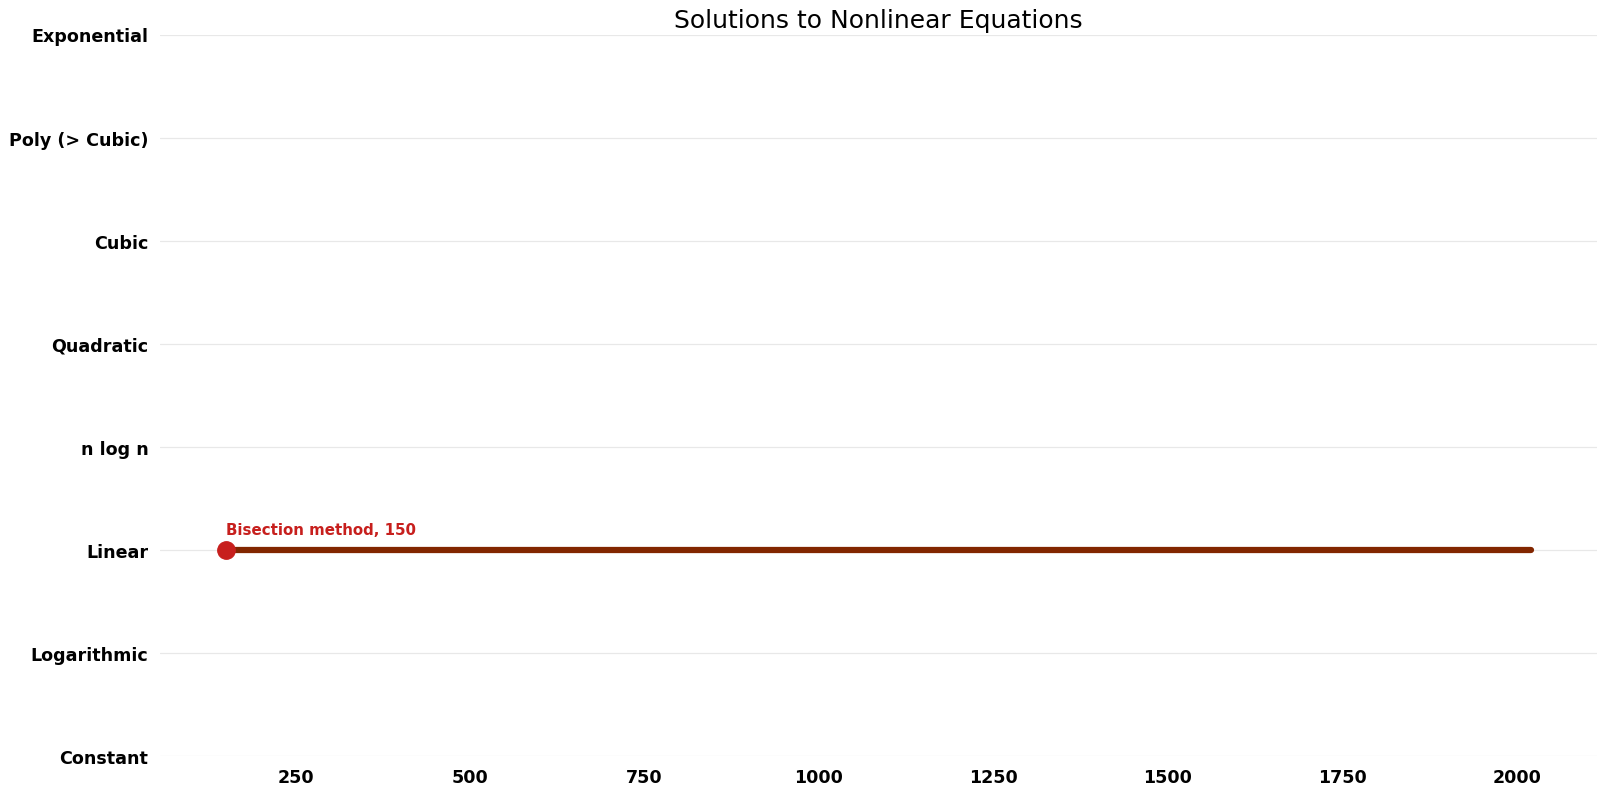 File:Solutions to Nonlinear Equations - Time.png